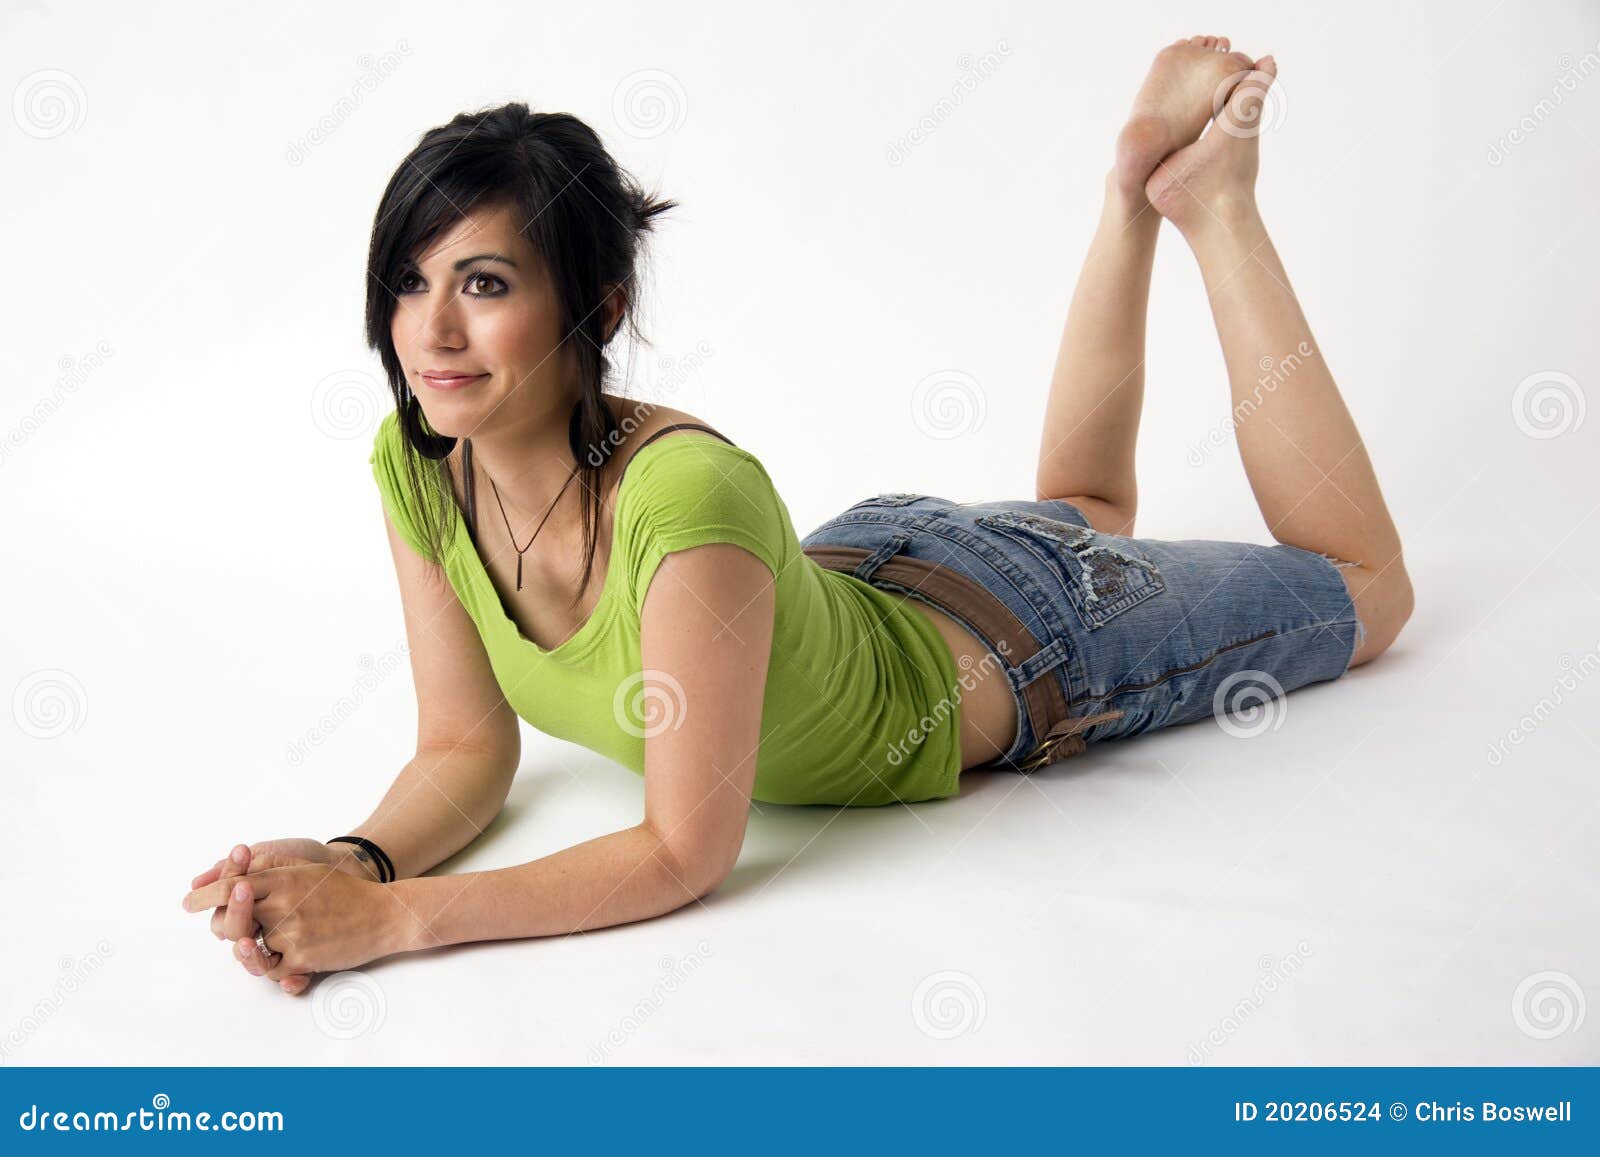 Woman Wearing Shorts Stock Photos and Images - 123RF